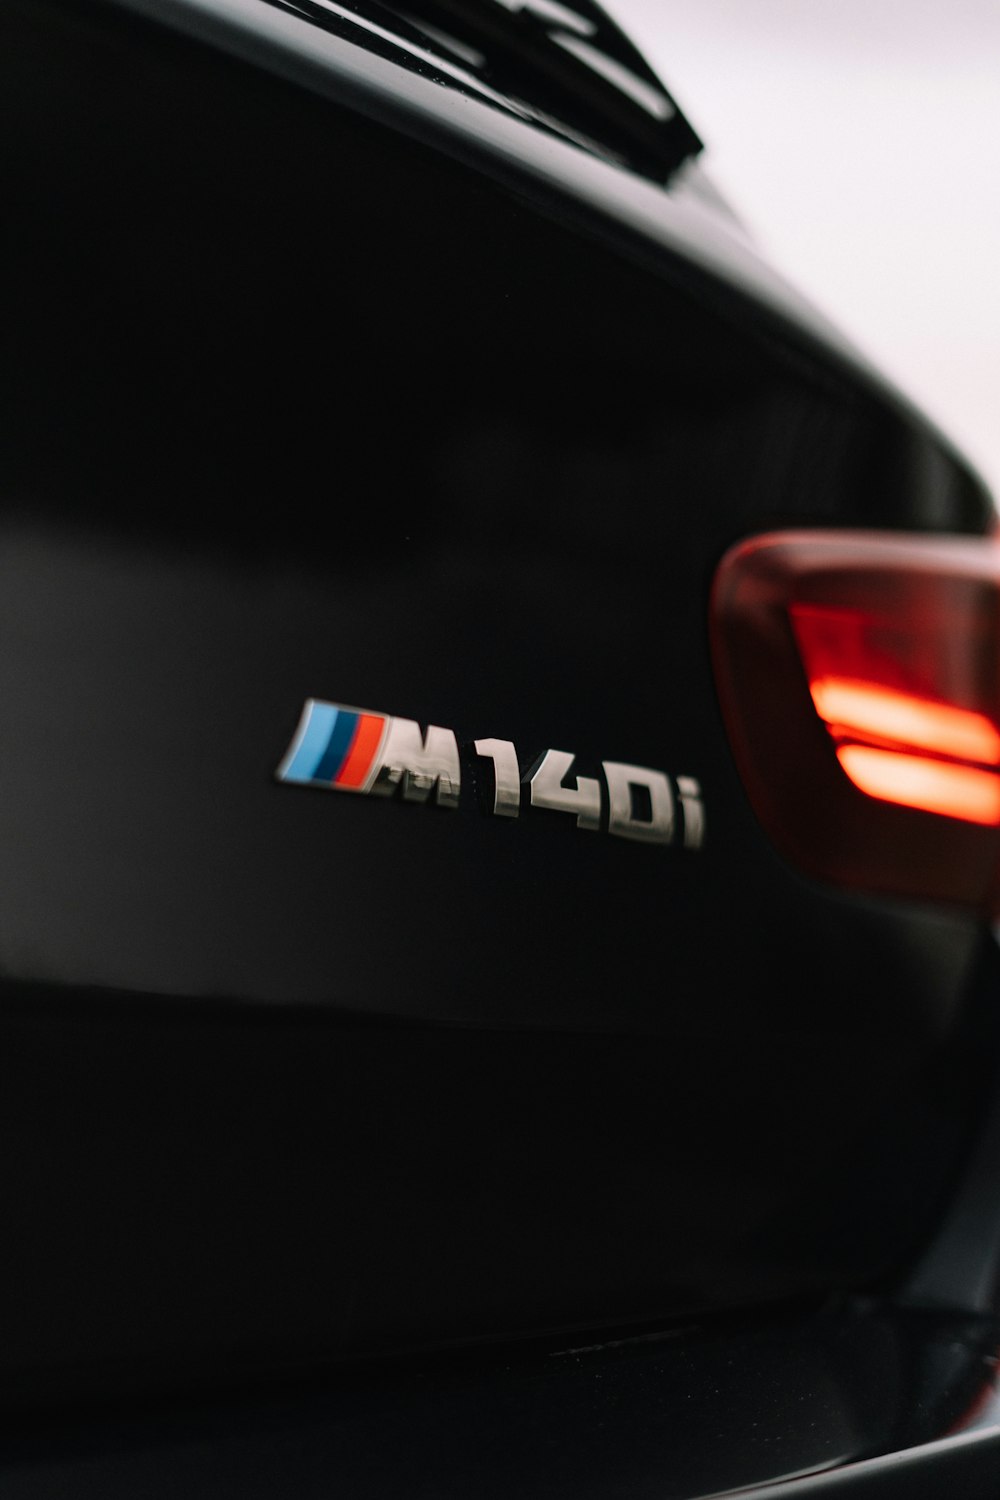 a close up of a bmw logo on the back of a car